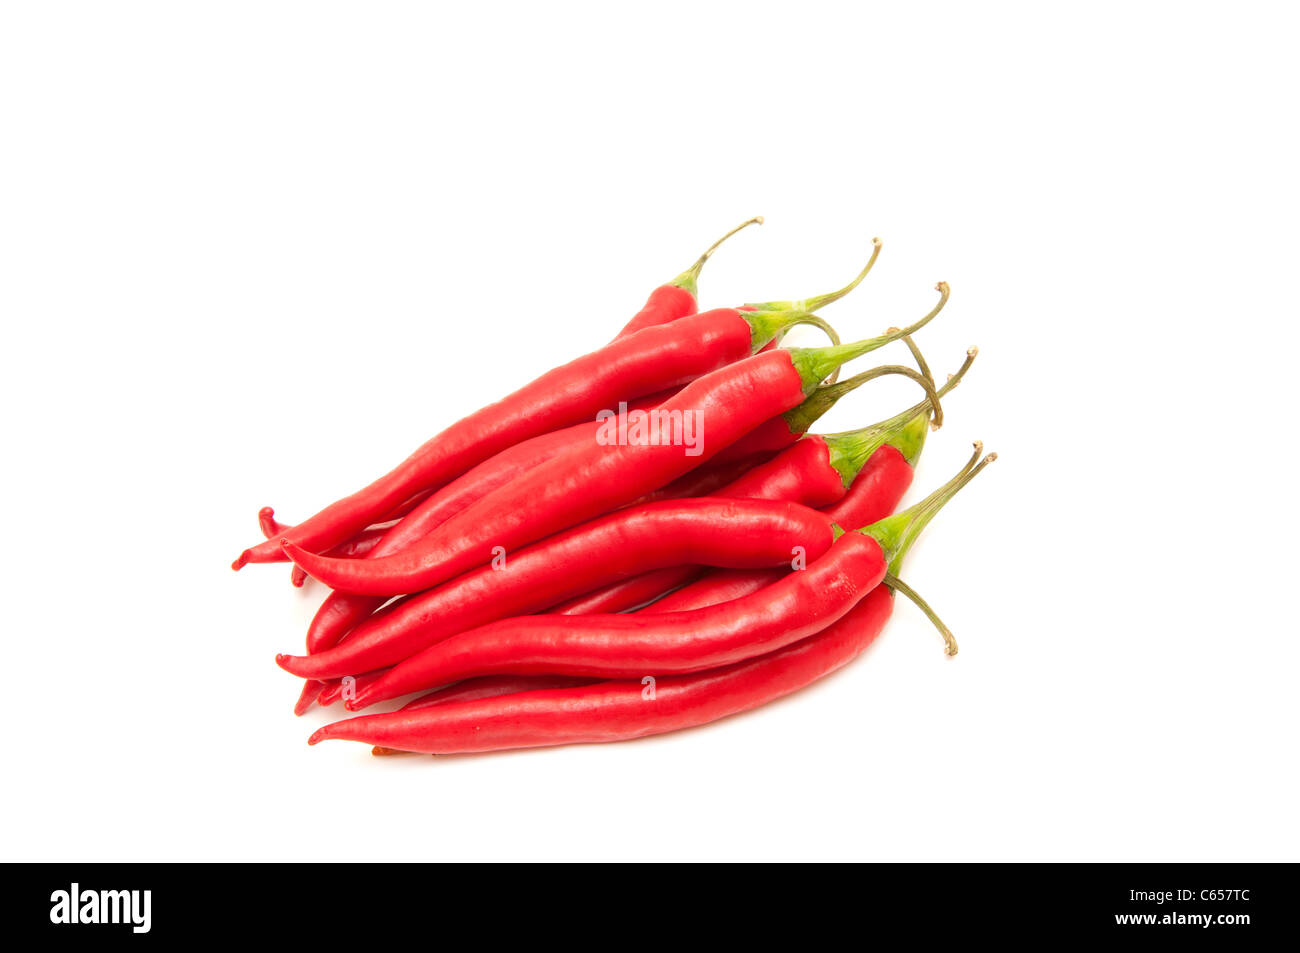 Red hot chili on a white background Stock Photo